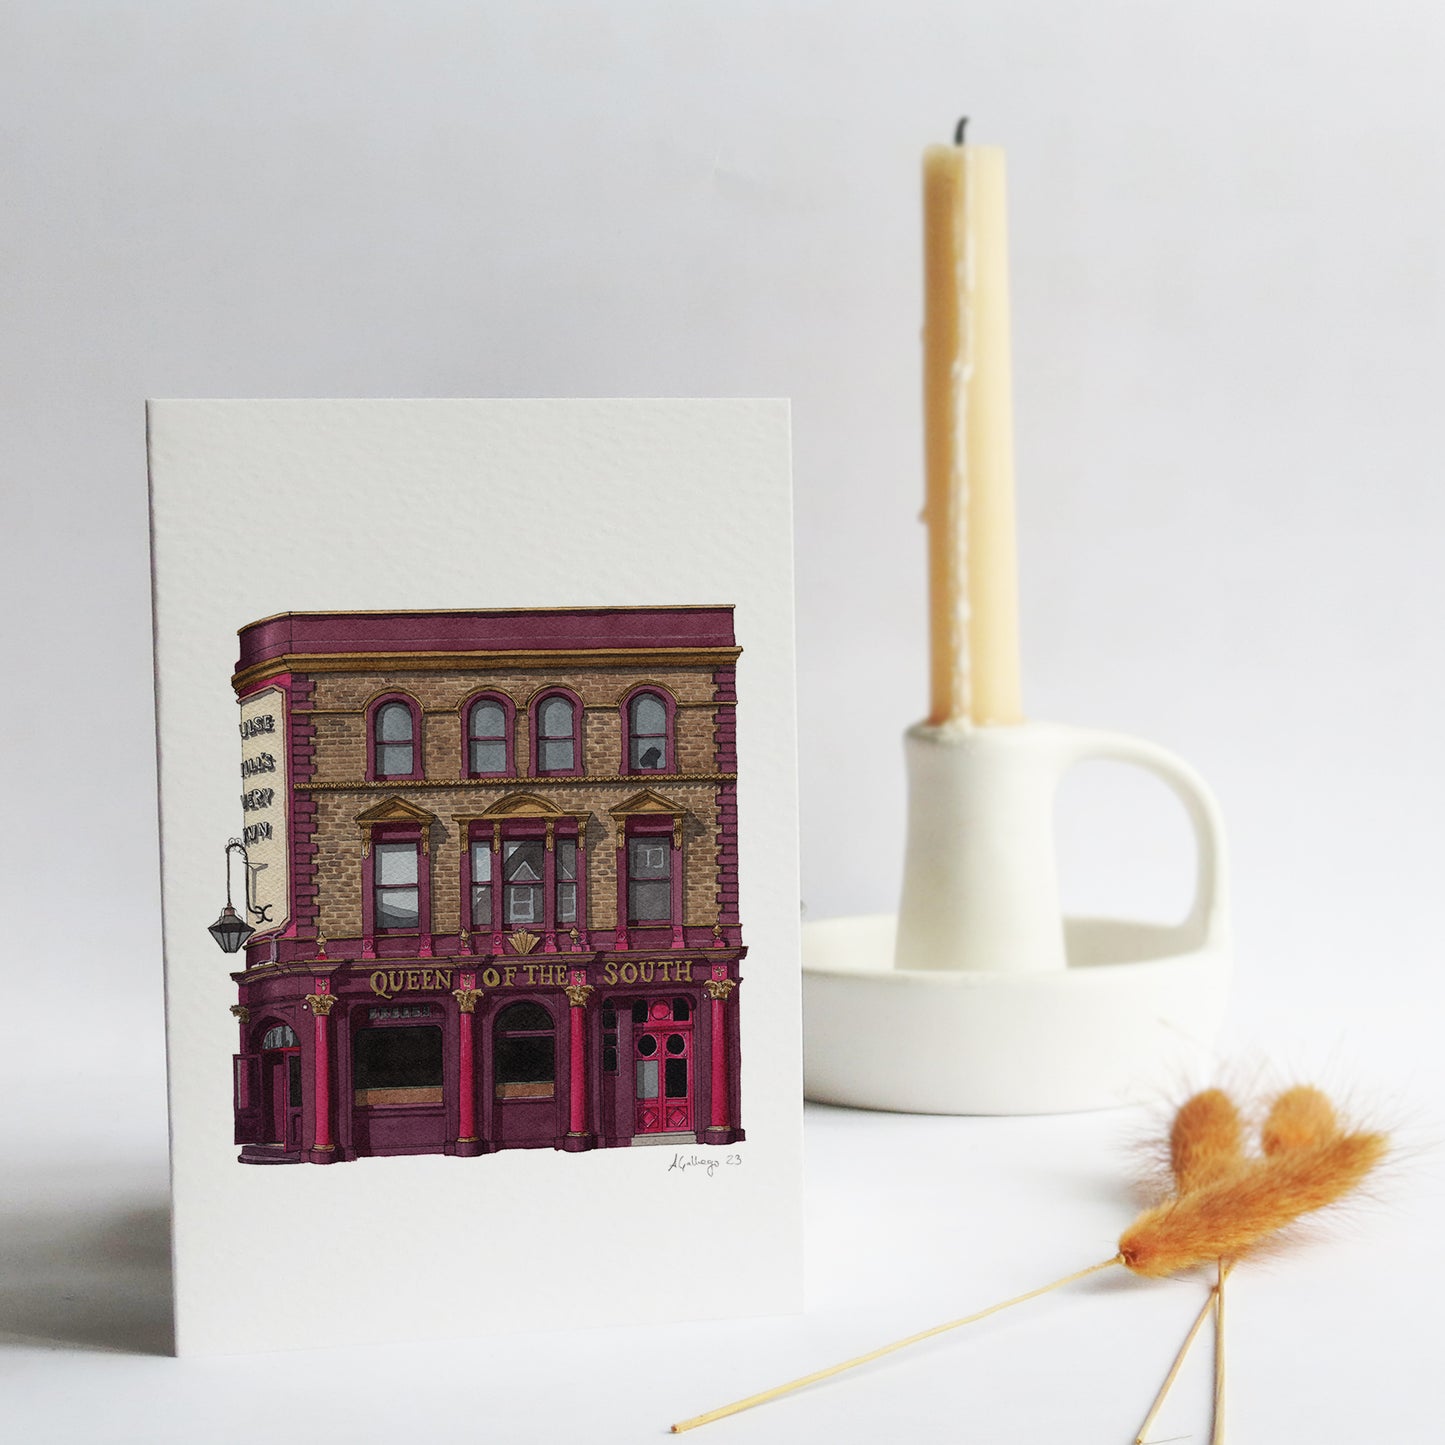 Tulse Hill - Queen of the South pub - Greeting card with envelope